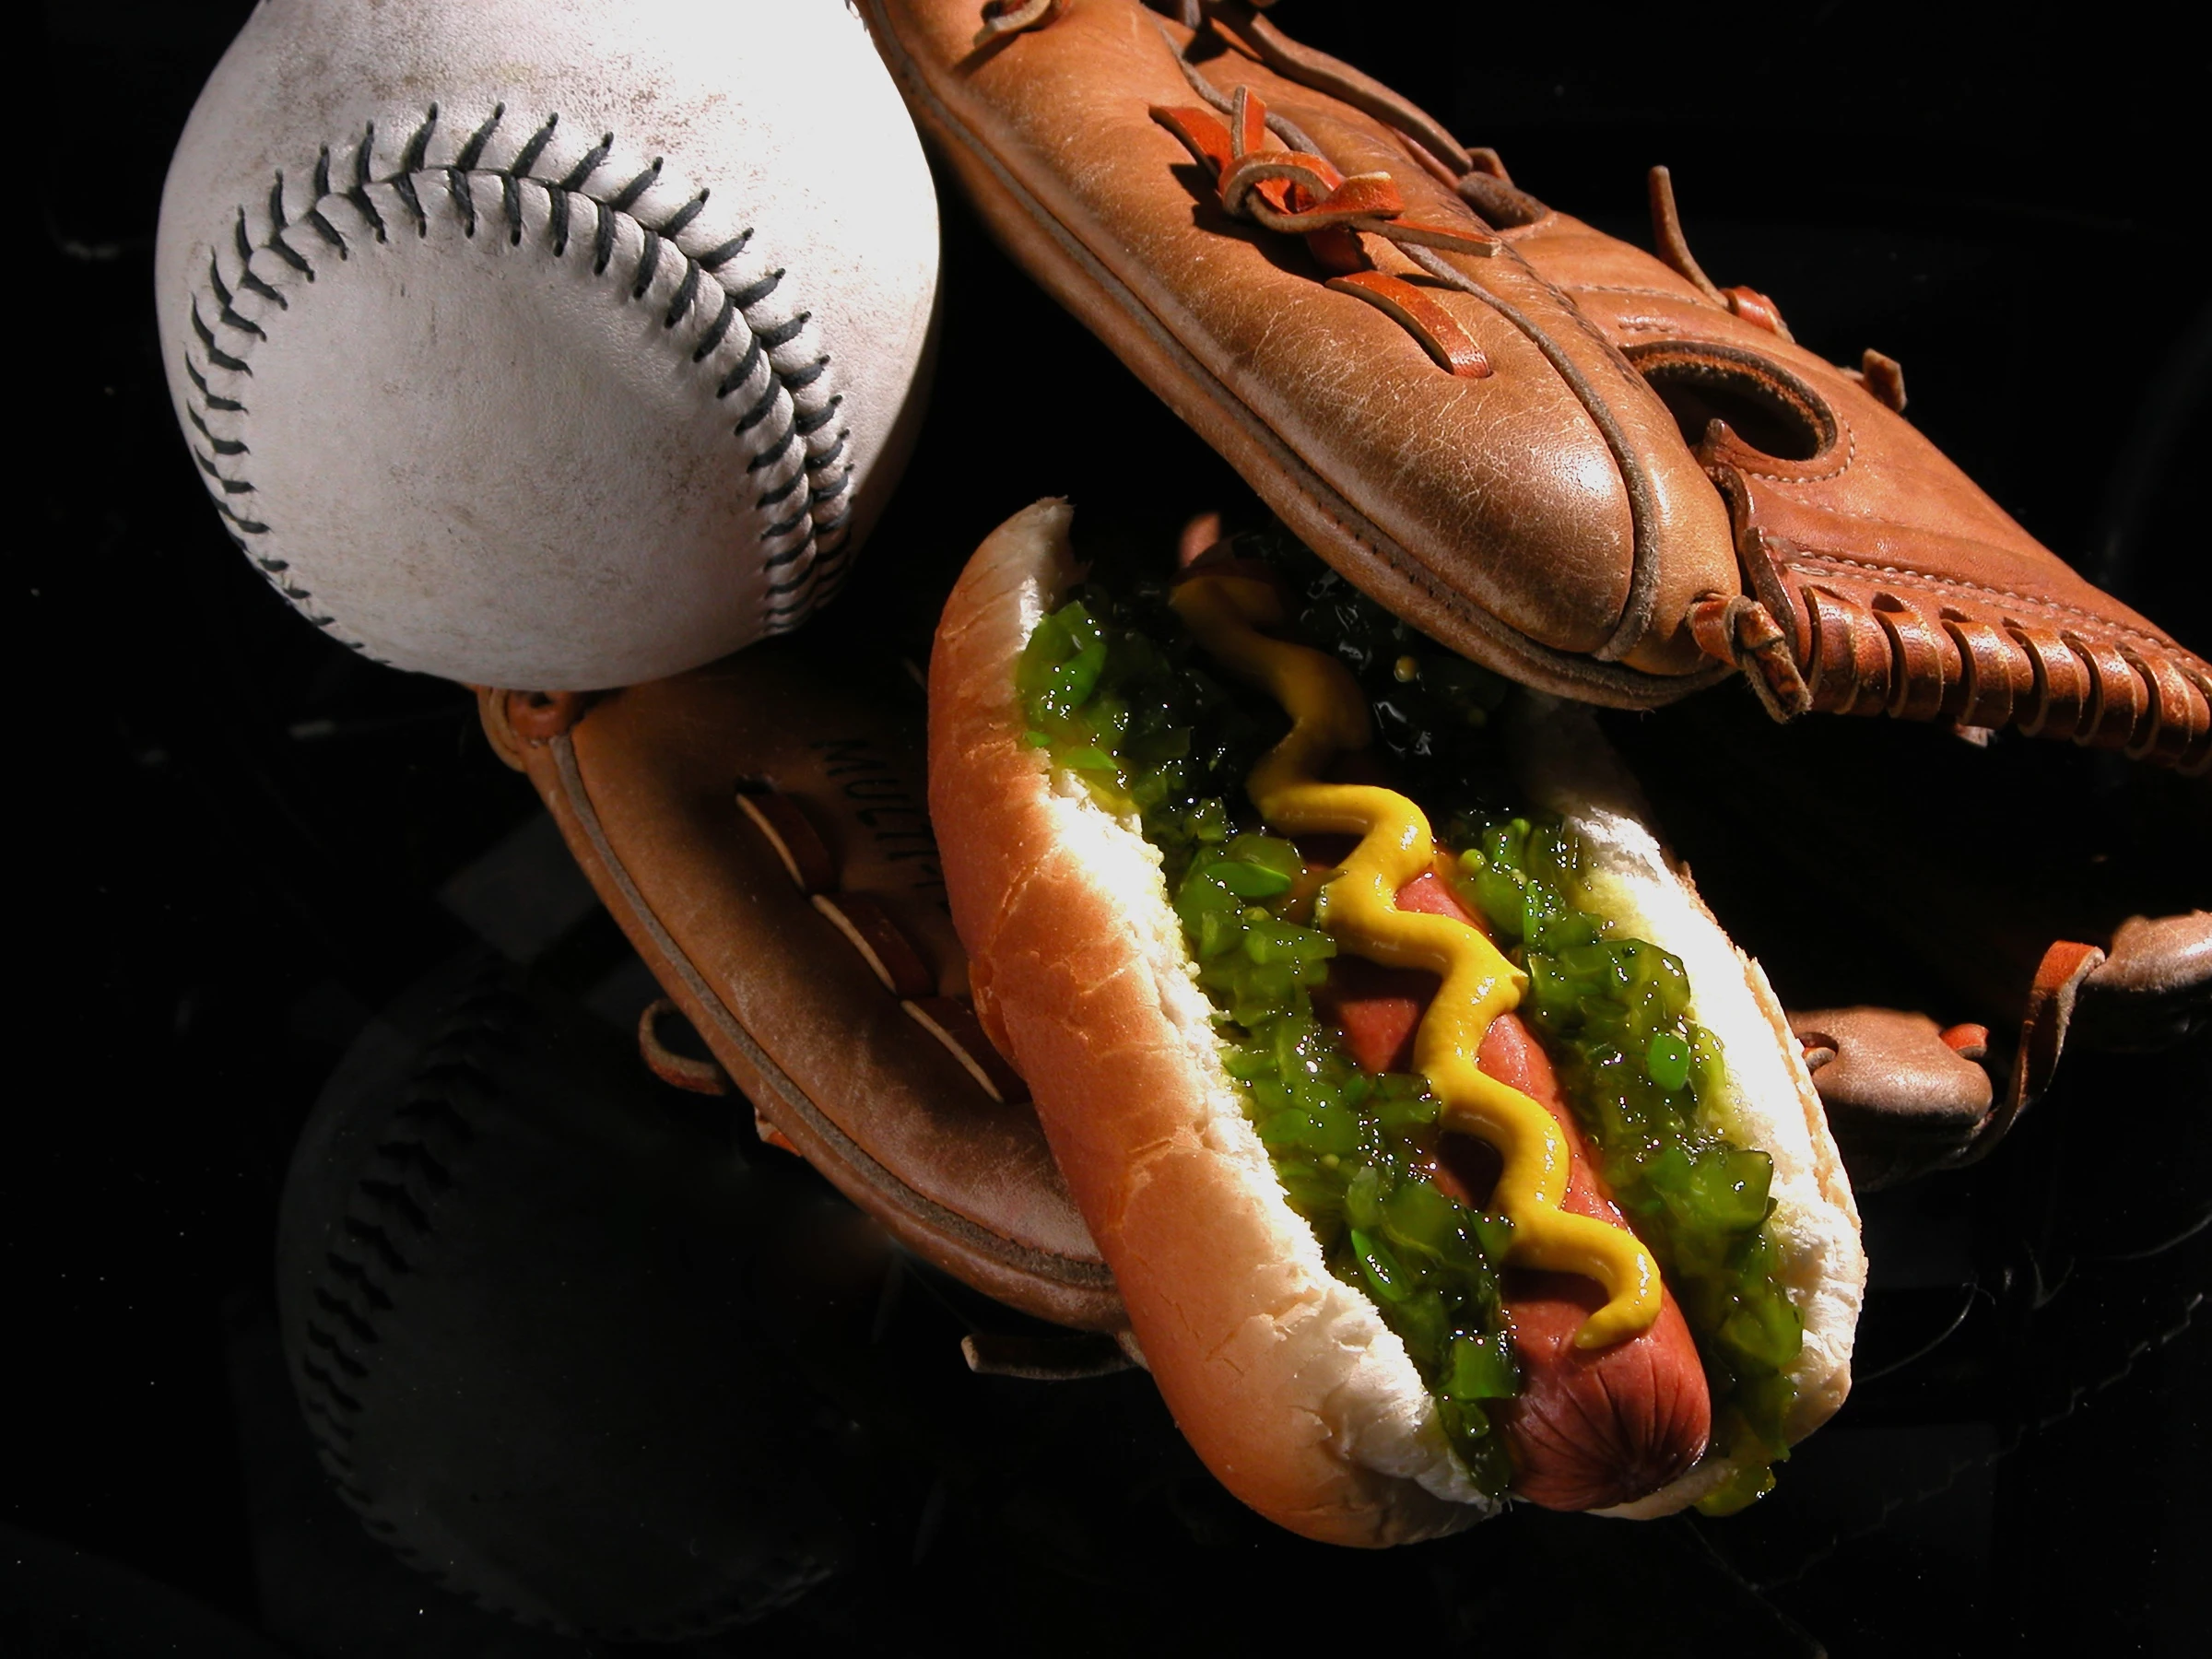 Swing into baseball season with a hot dog for every team!